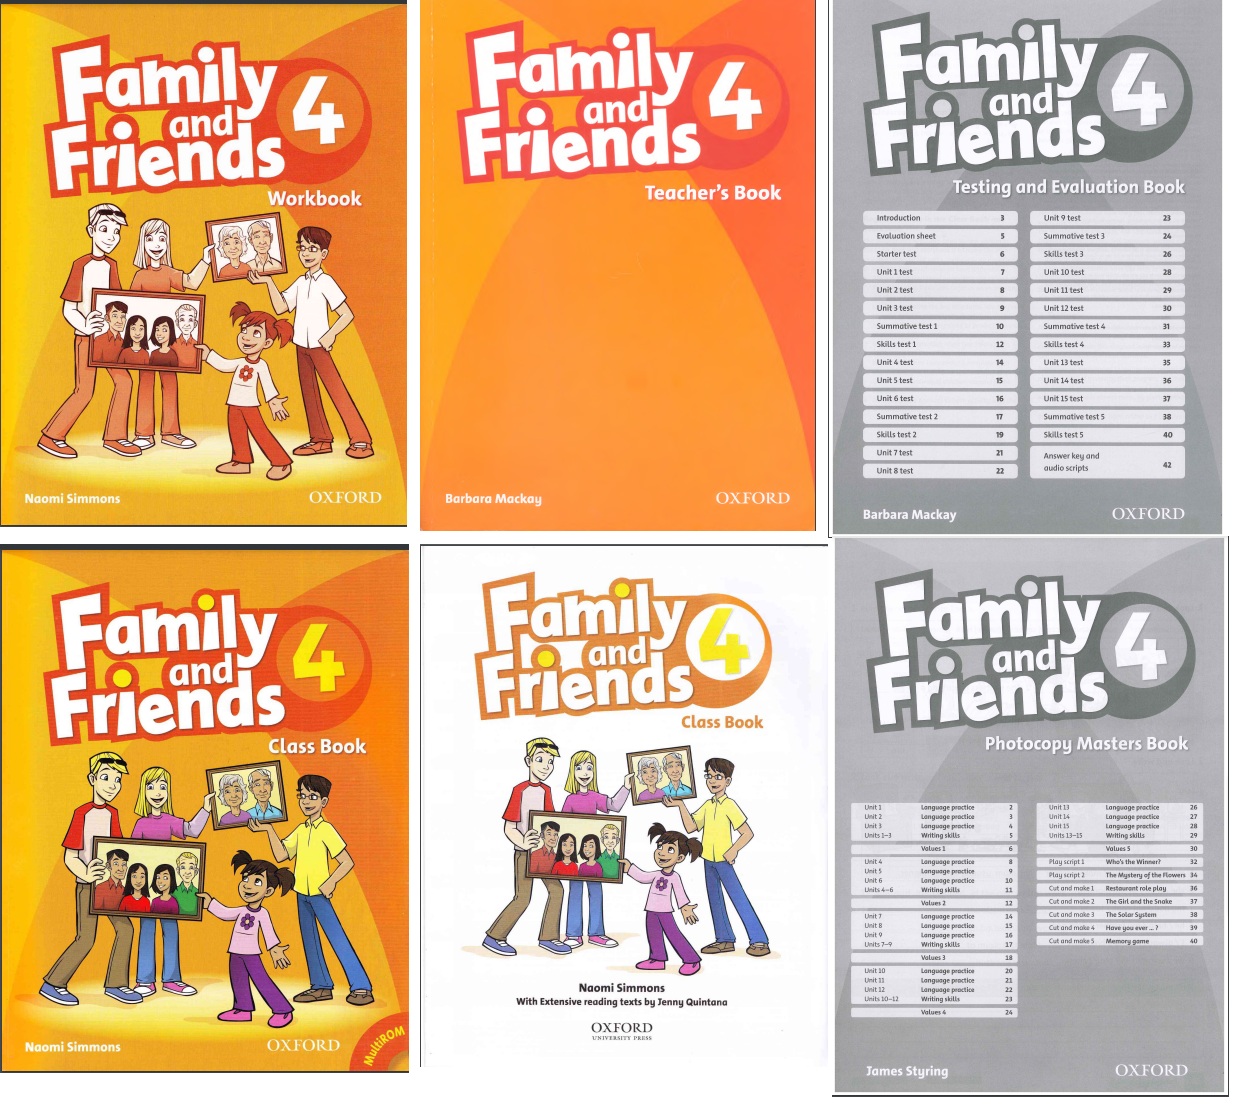 Family And Friends 4 PDF Free Download full trọn bộ